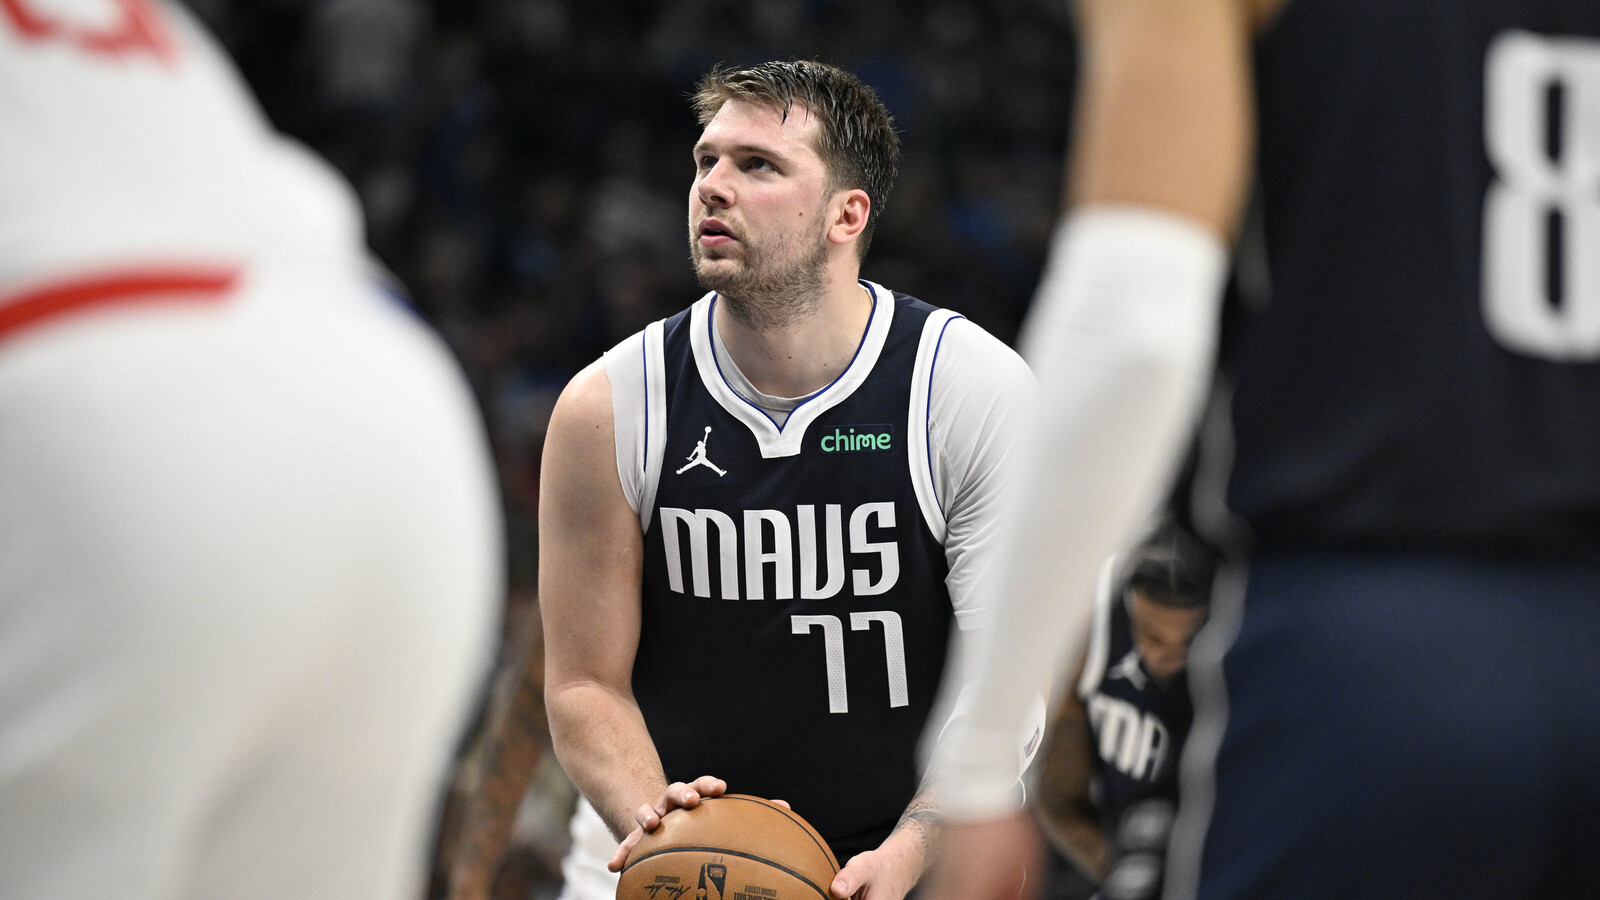 Watch: Luka Doncic jokes about coaching career in wholesome reaction with ex-teammate JJ Redick